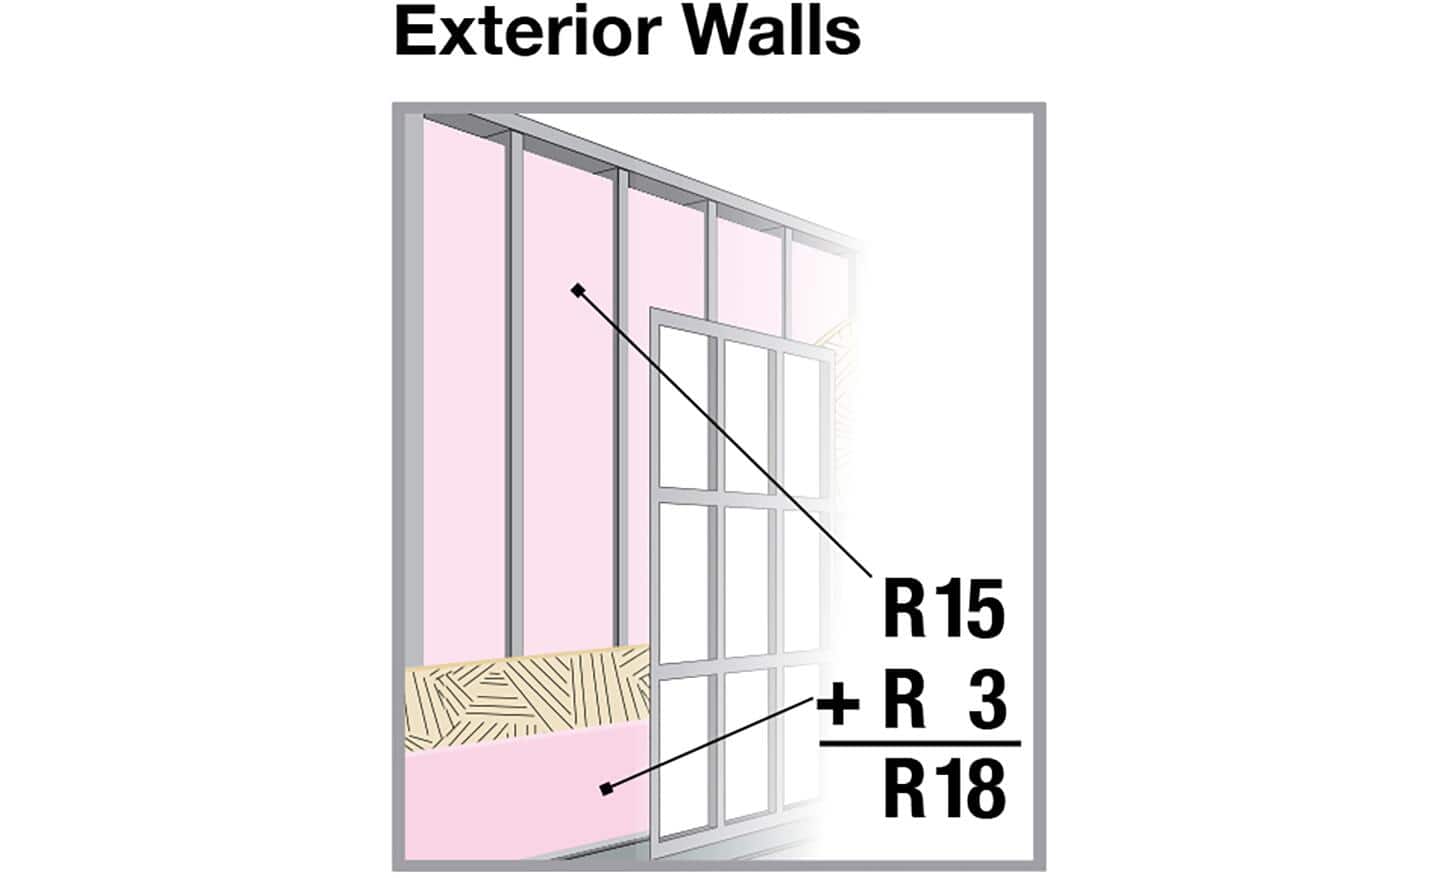 Combined R-values for extra exterior wall insulation.